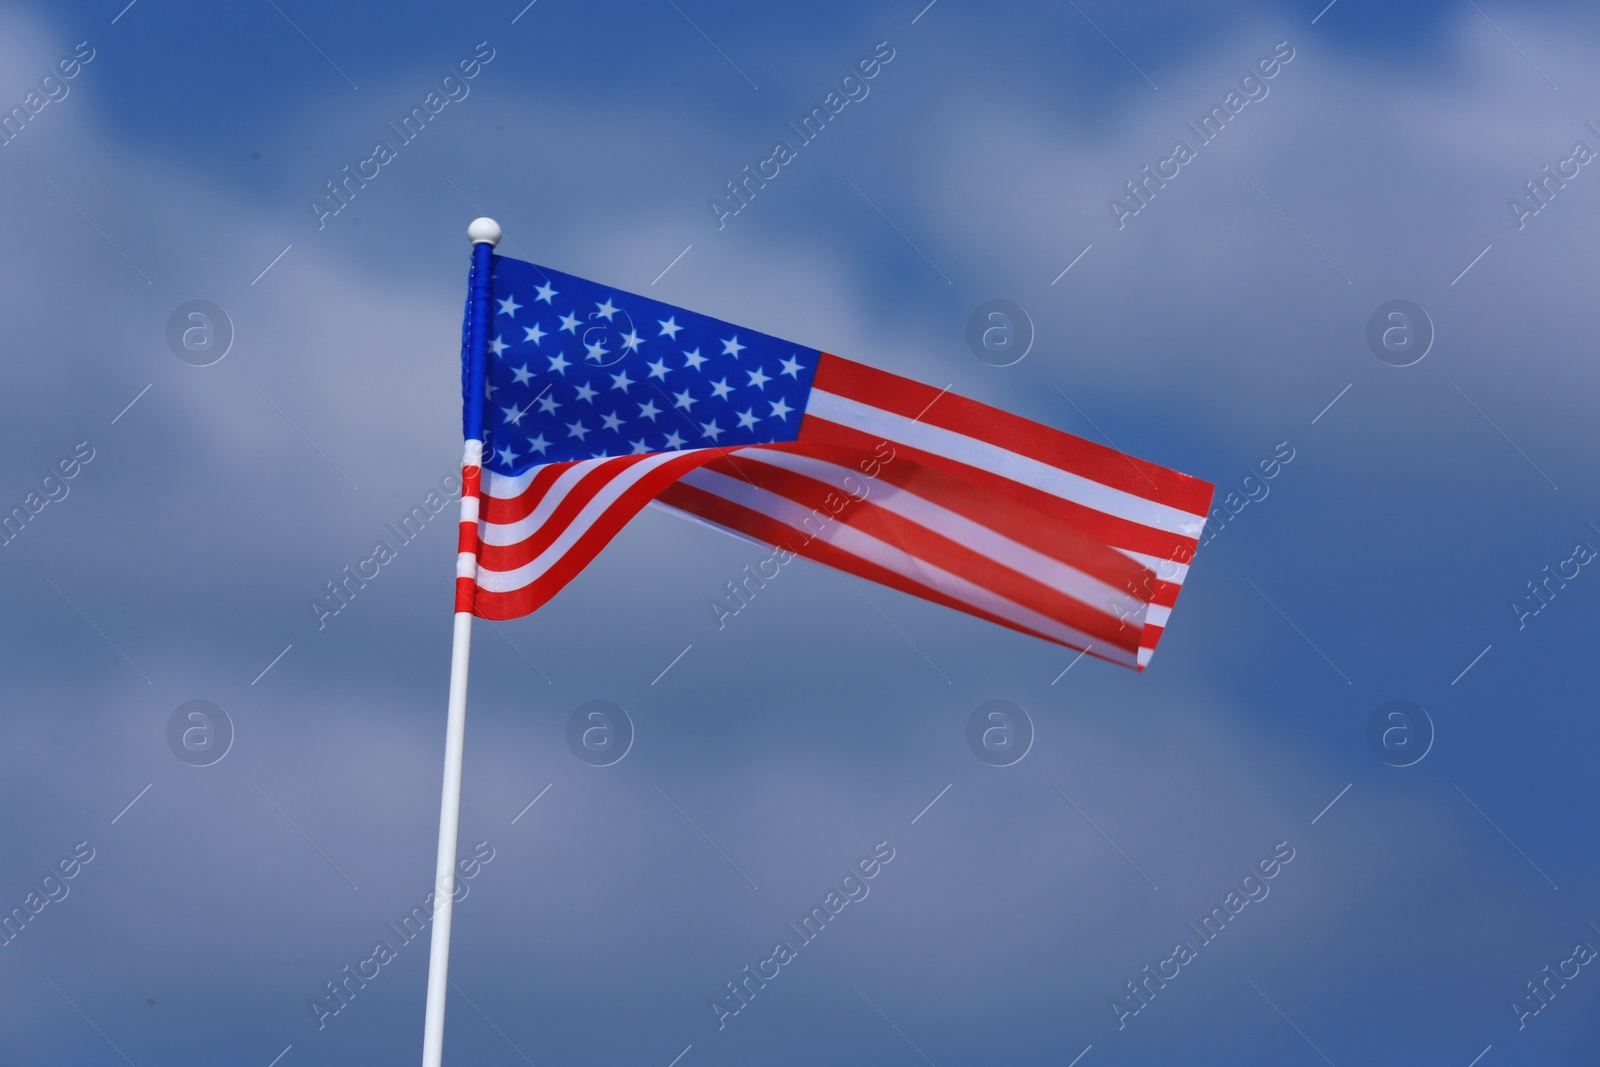 Photo of Small American flag against cloudy blue sky